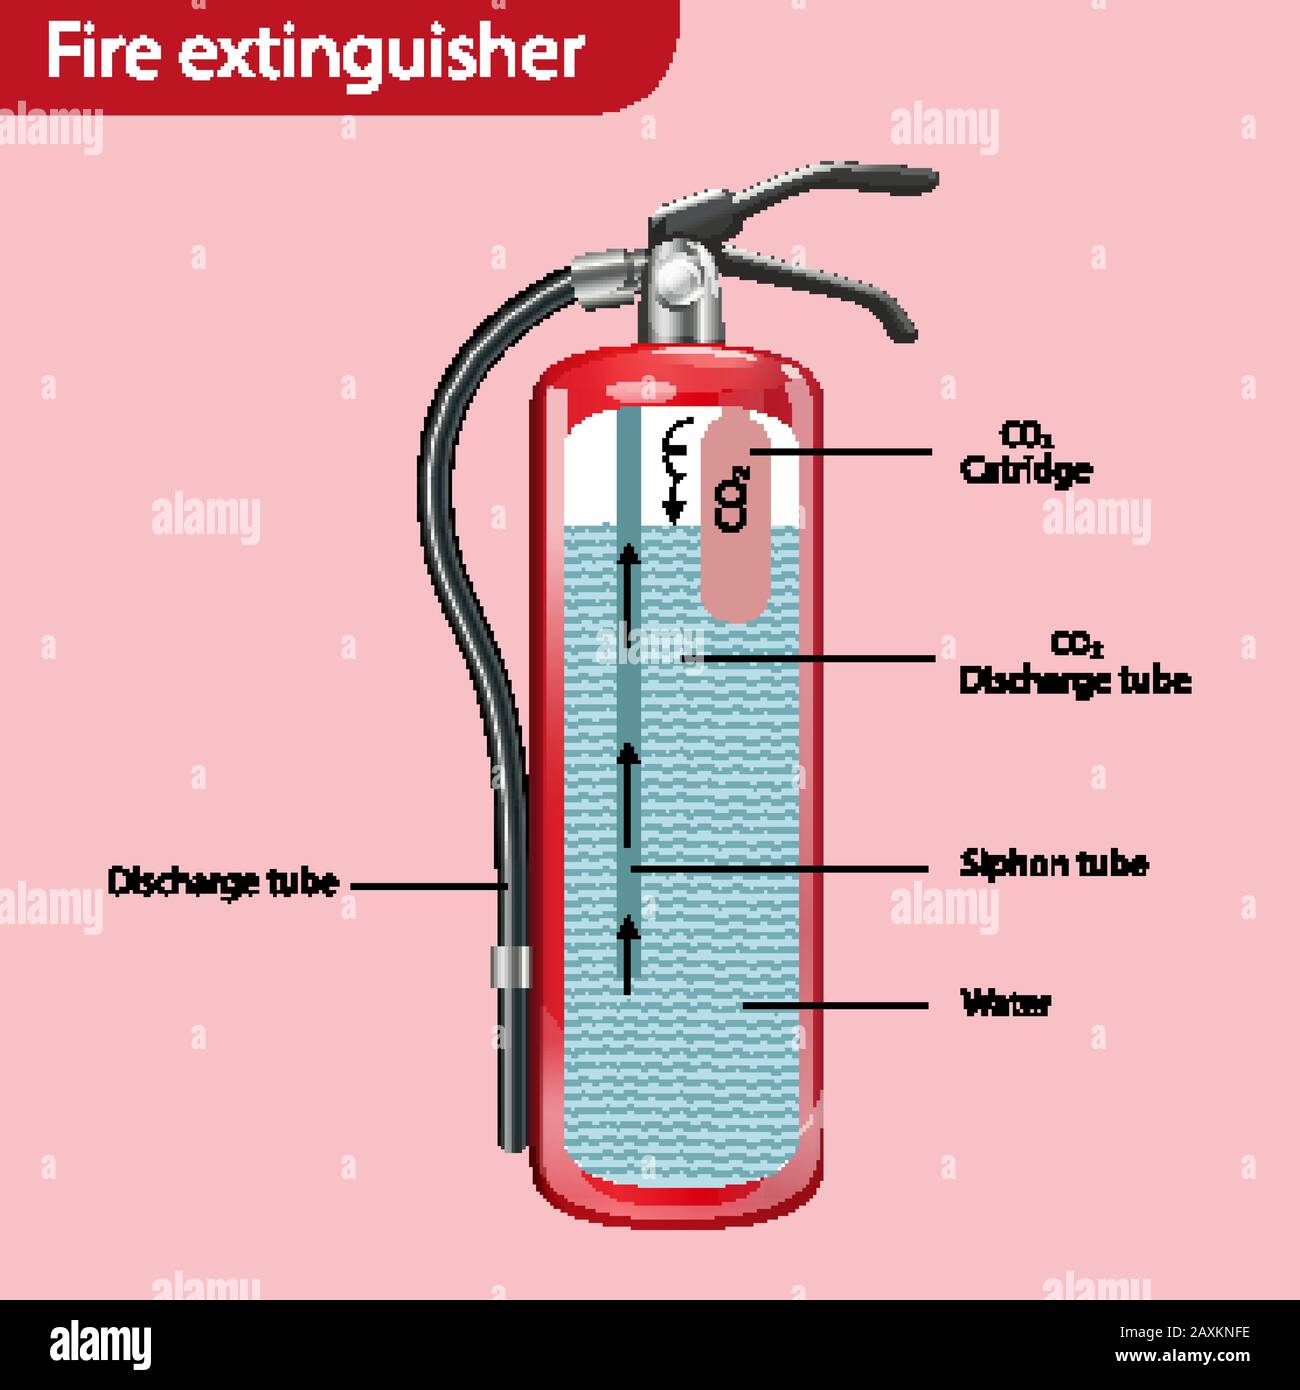 Diagram showing inside the fire extinguisher illustration Stock Vector  Image & Art - Alamy